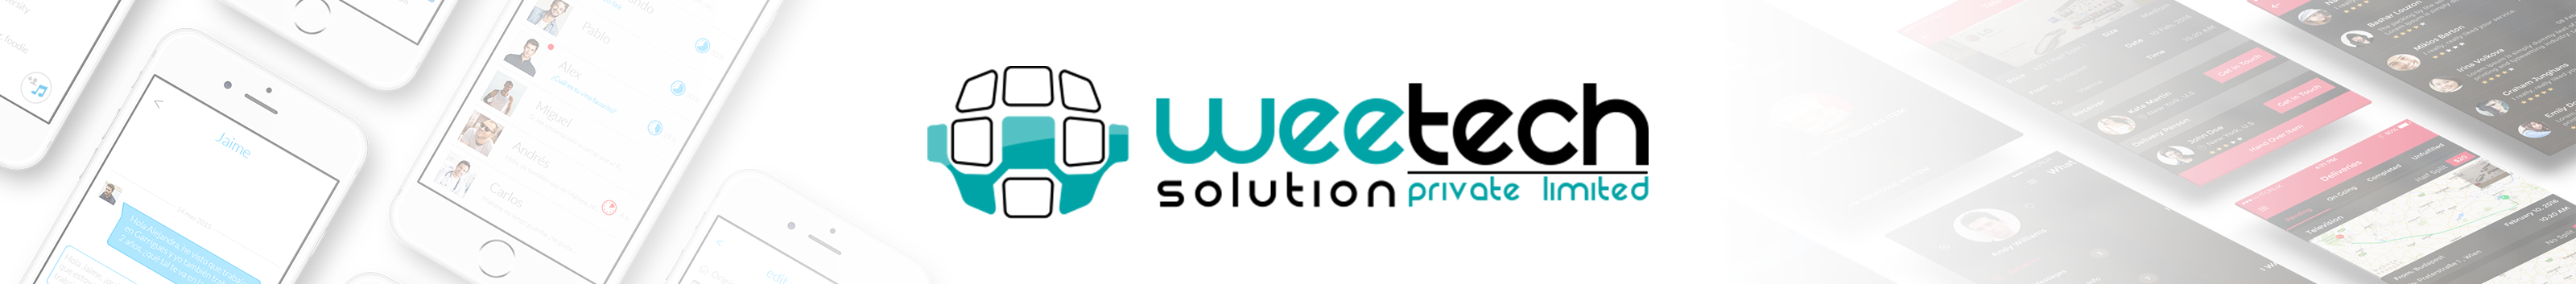 WeeTech Solution's profile banner